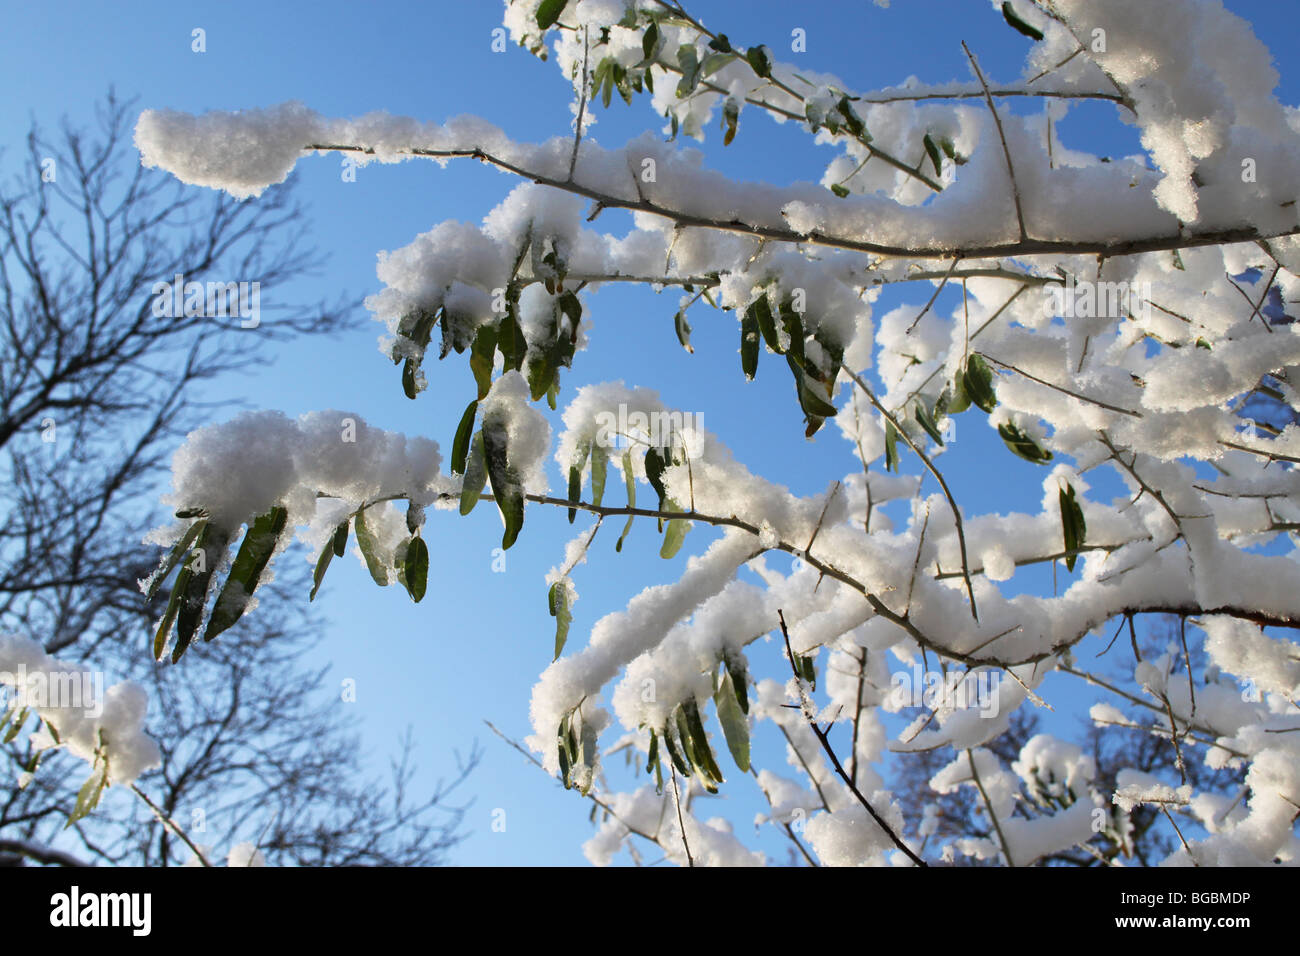 Snow covered branches and blue wintery sky, Crystal Palace Park, London, UK Stock Photo